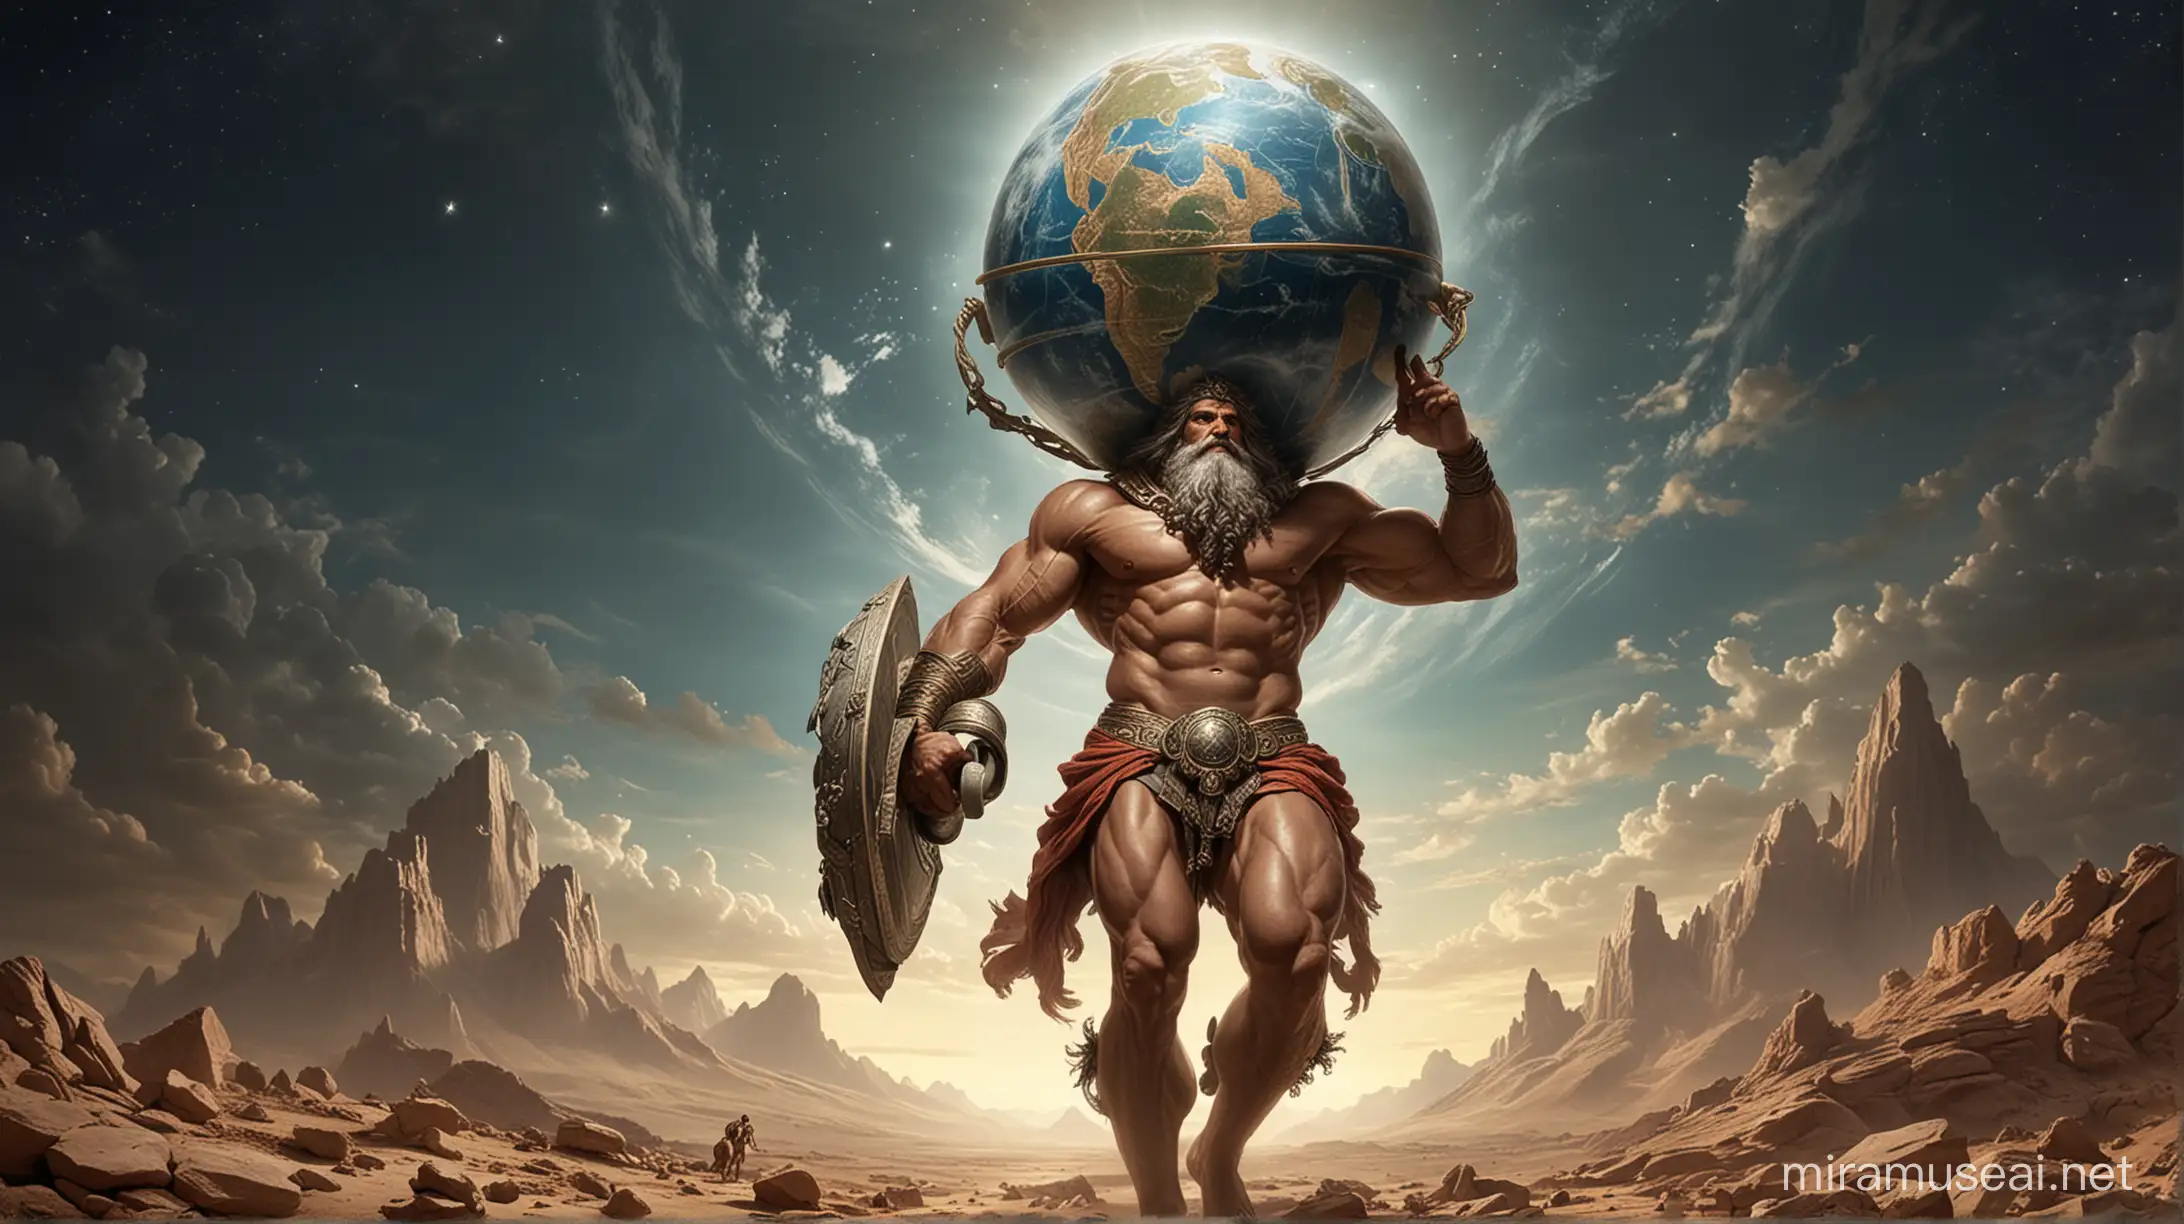 God Atlas, carrying the world on his back